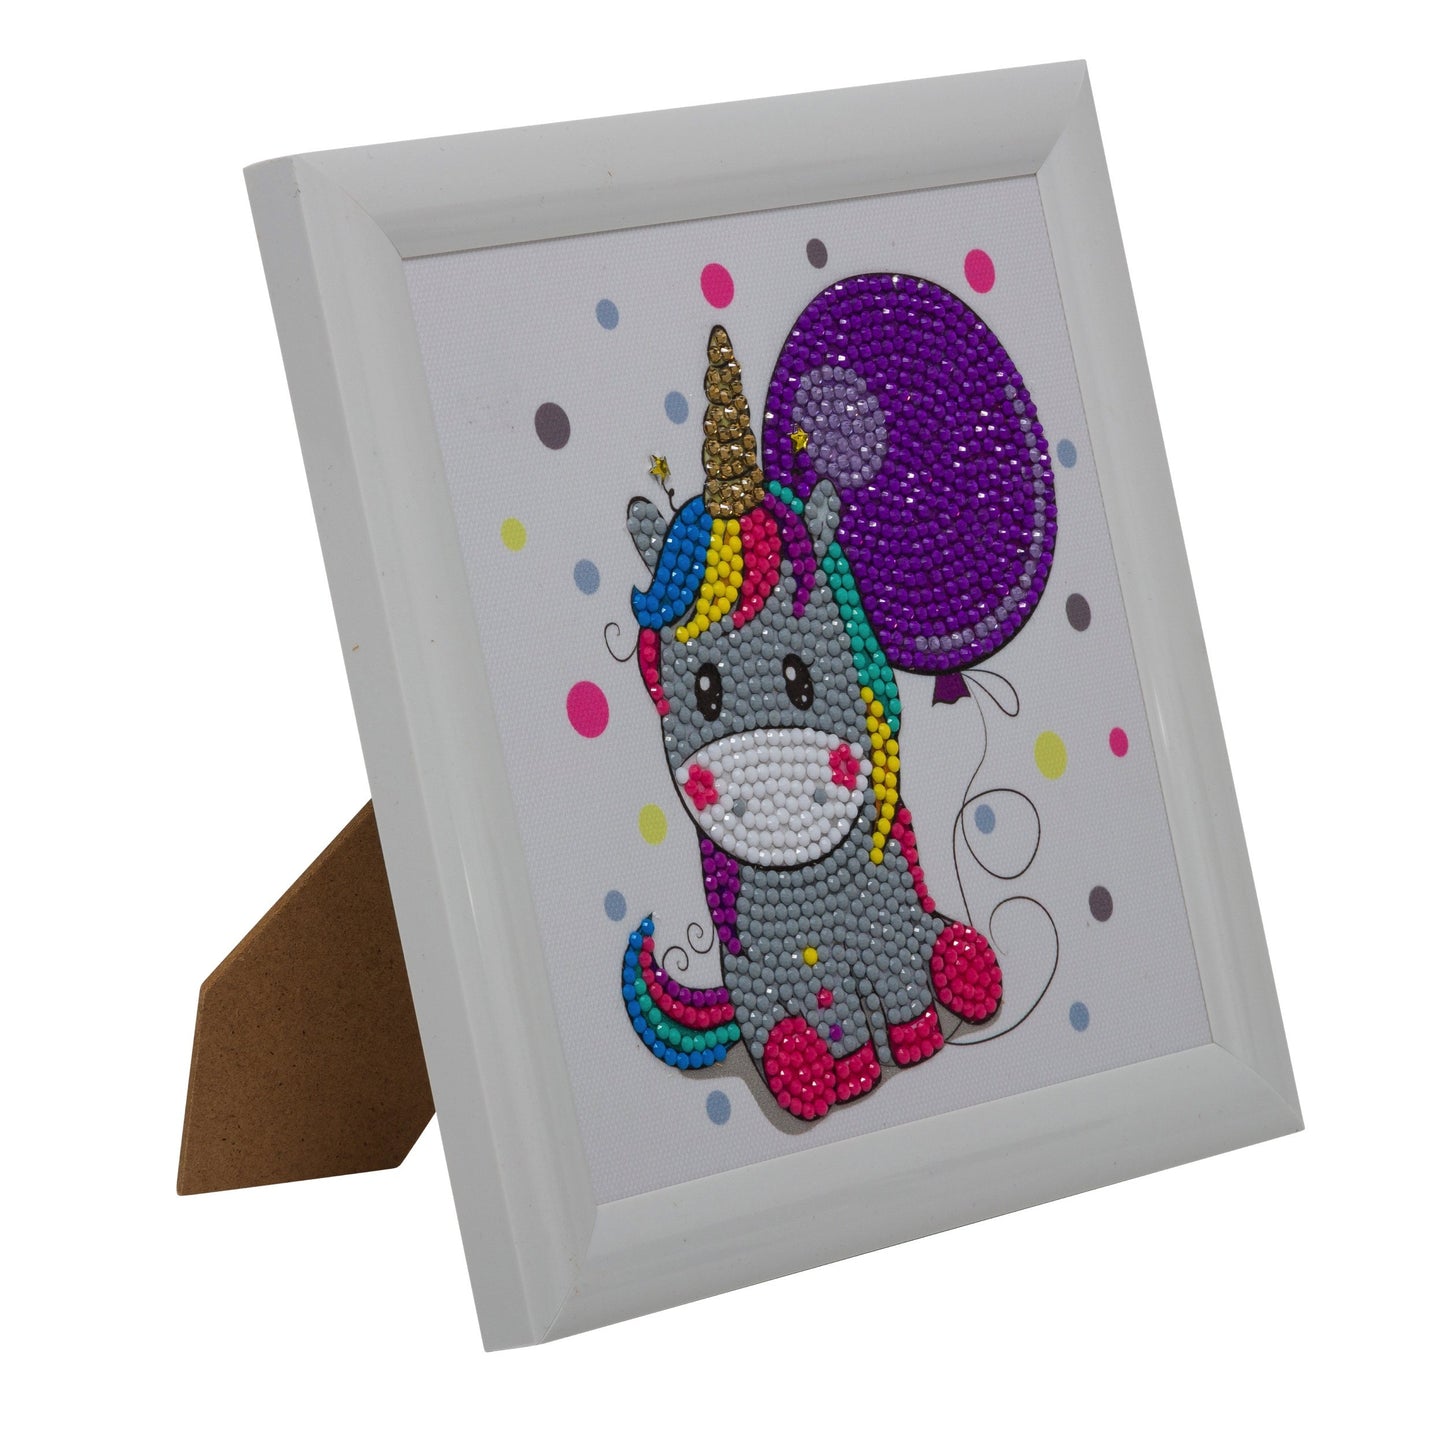 CAFBL-1: "Party Unicorn" Crystal Art Frameables Kit with Picture Frame